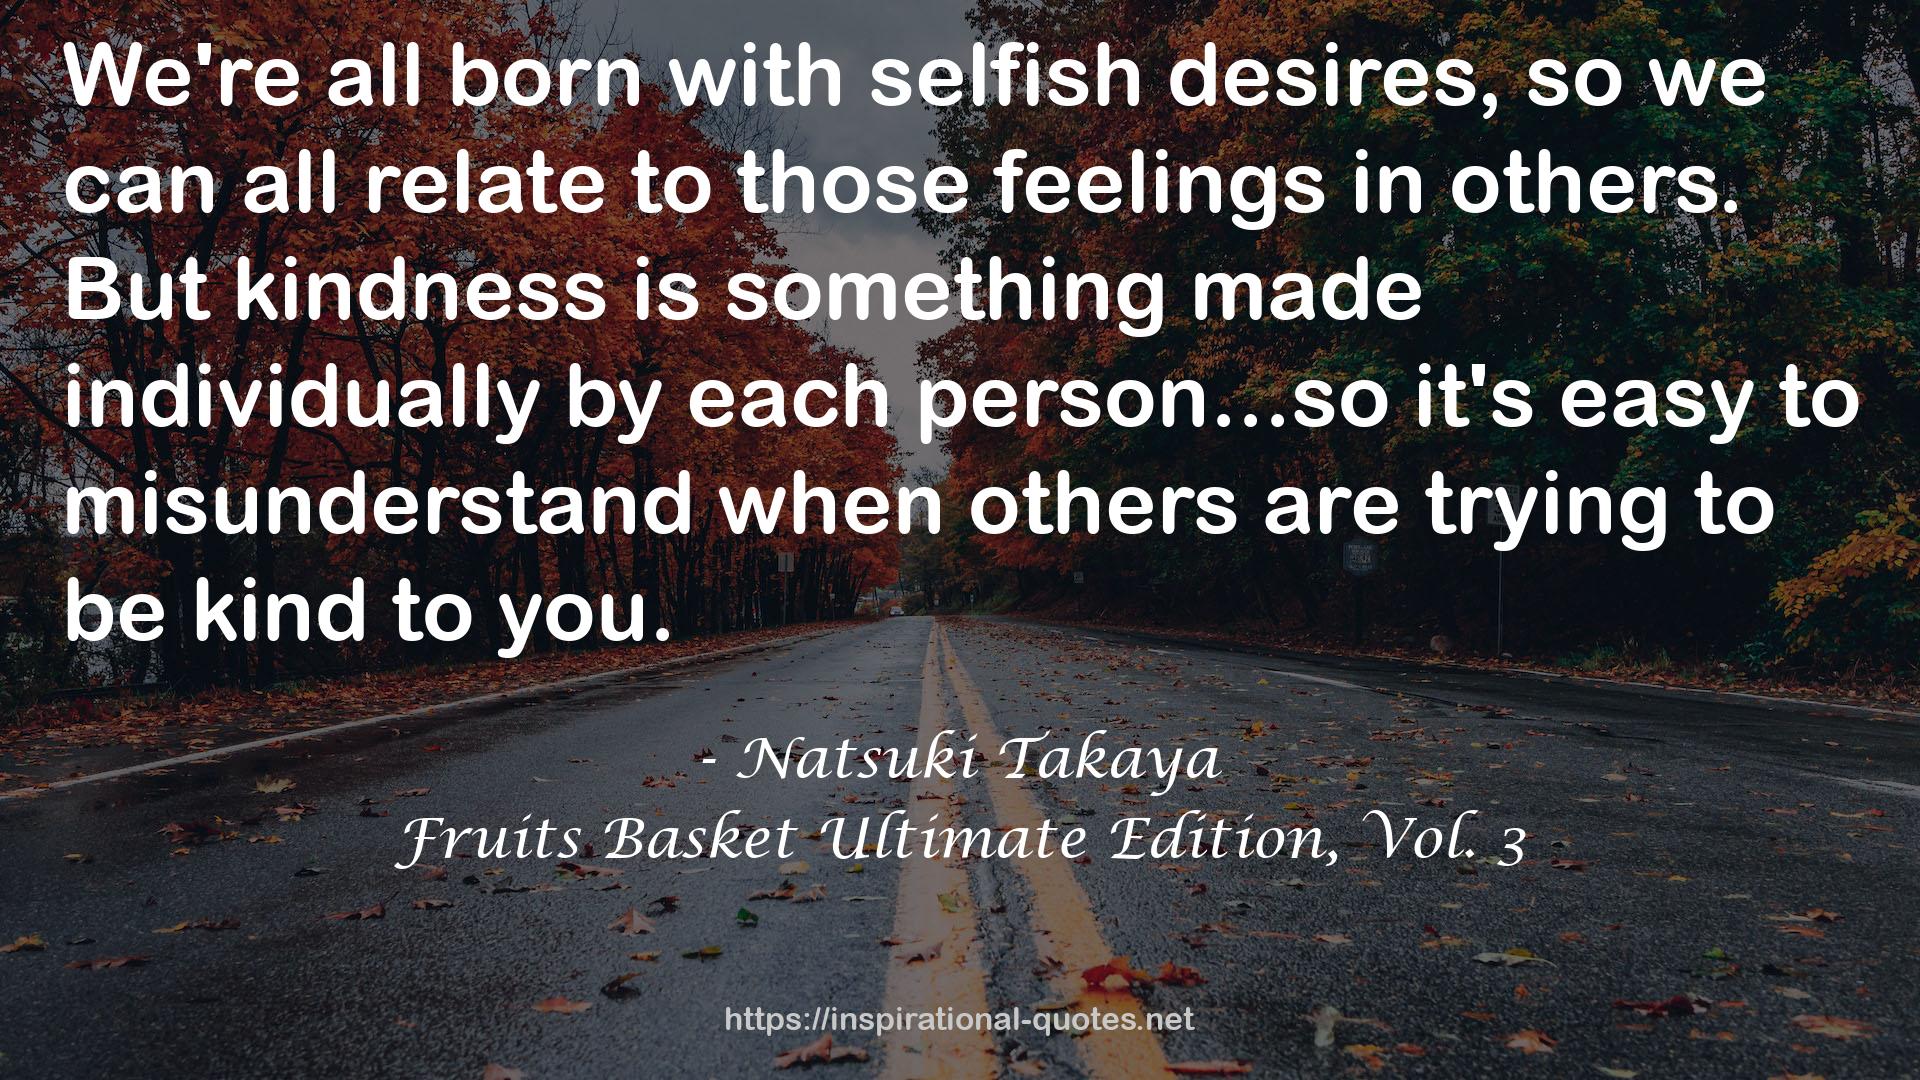 Fruits Basket Ultimate Edition, Vol. 3 QUOTES